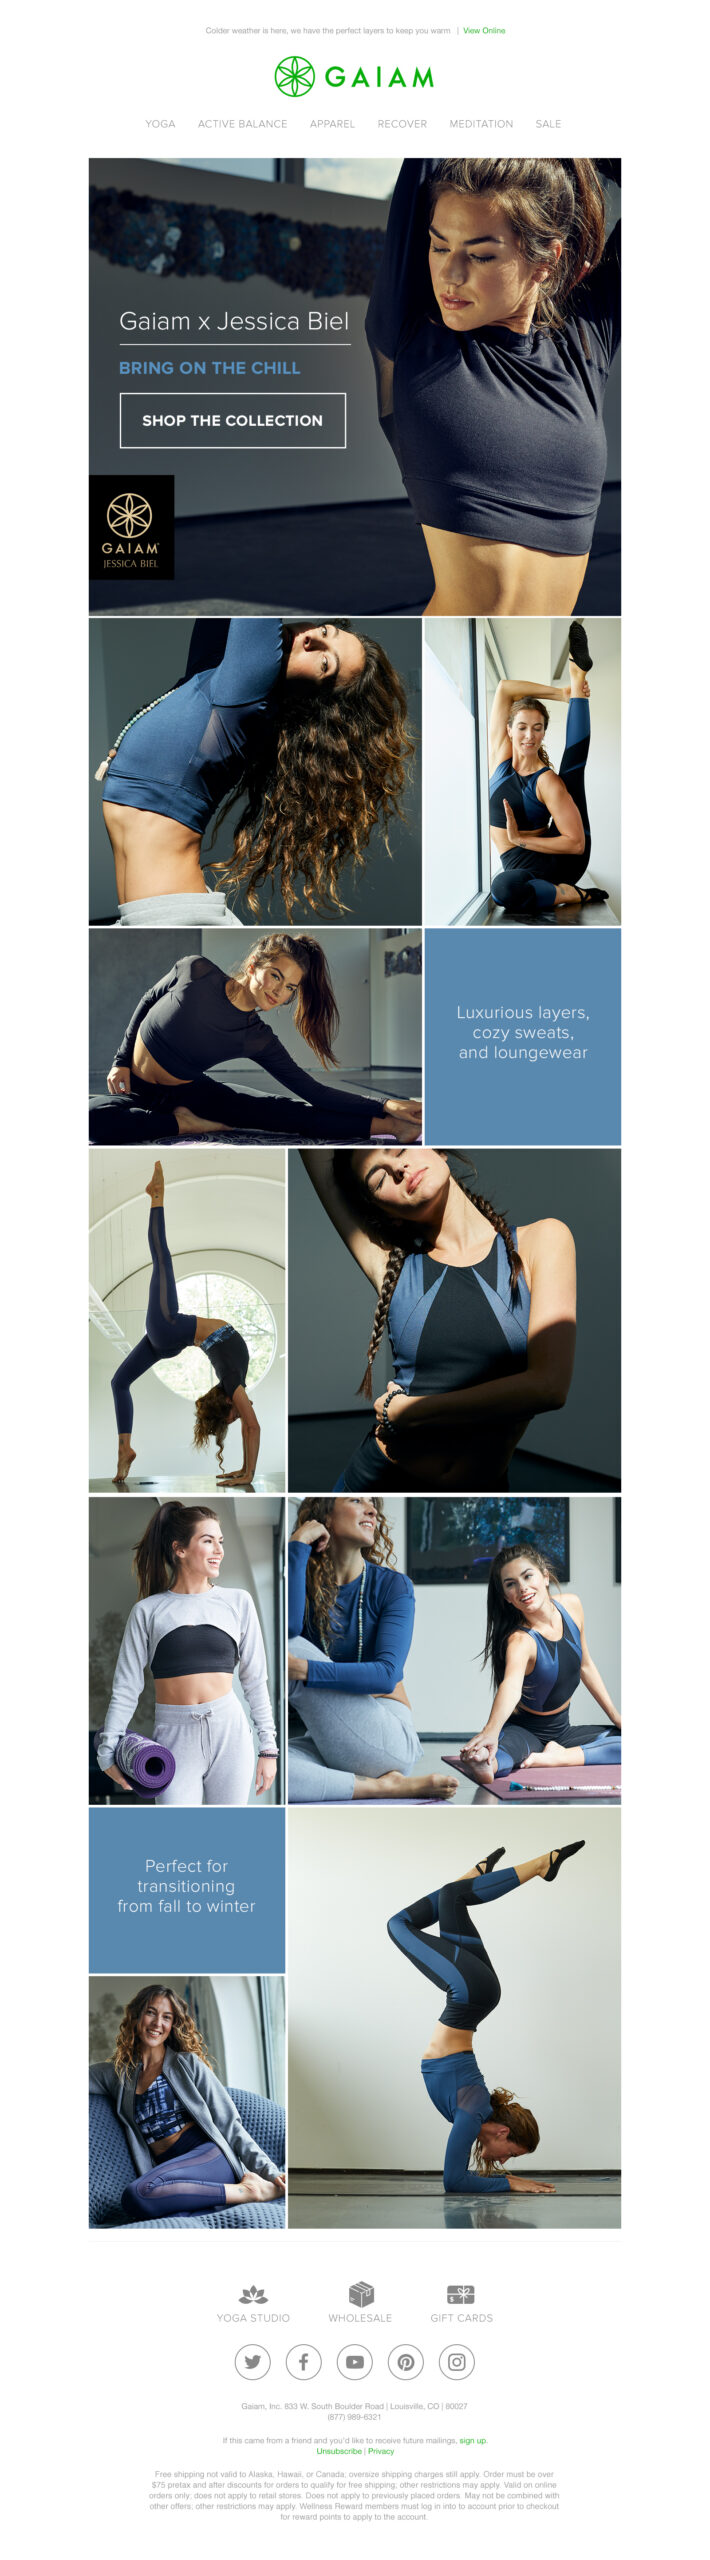 This tear sheet shows Jason Innes' shots for Gaiam in their email messaging to showcase Jessica Biel's line of clothing